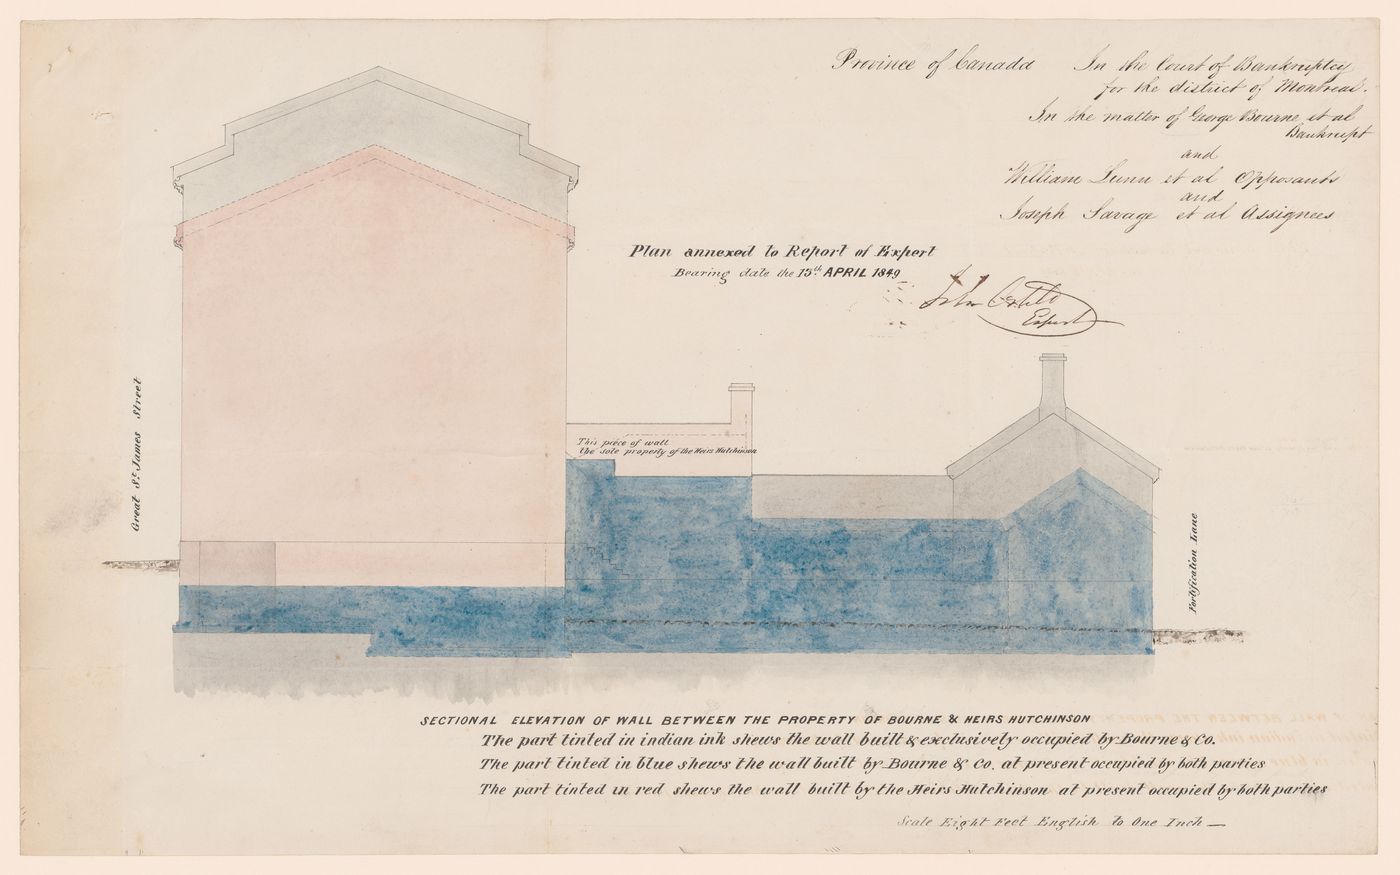 Sectional elevation of wall between the property of Bourne and heirs Hutchinson